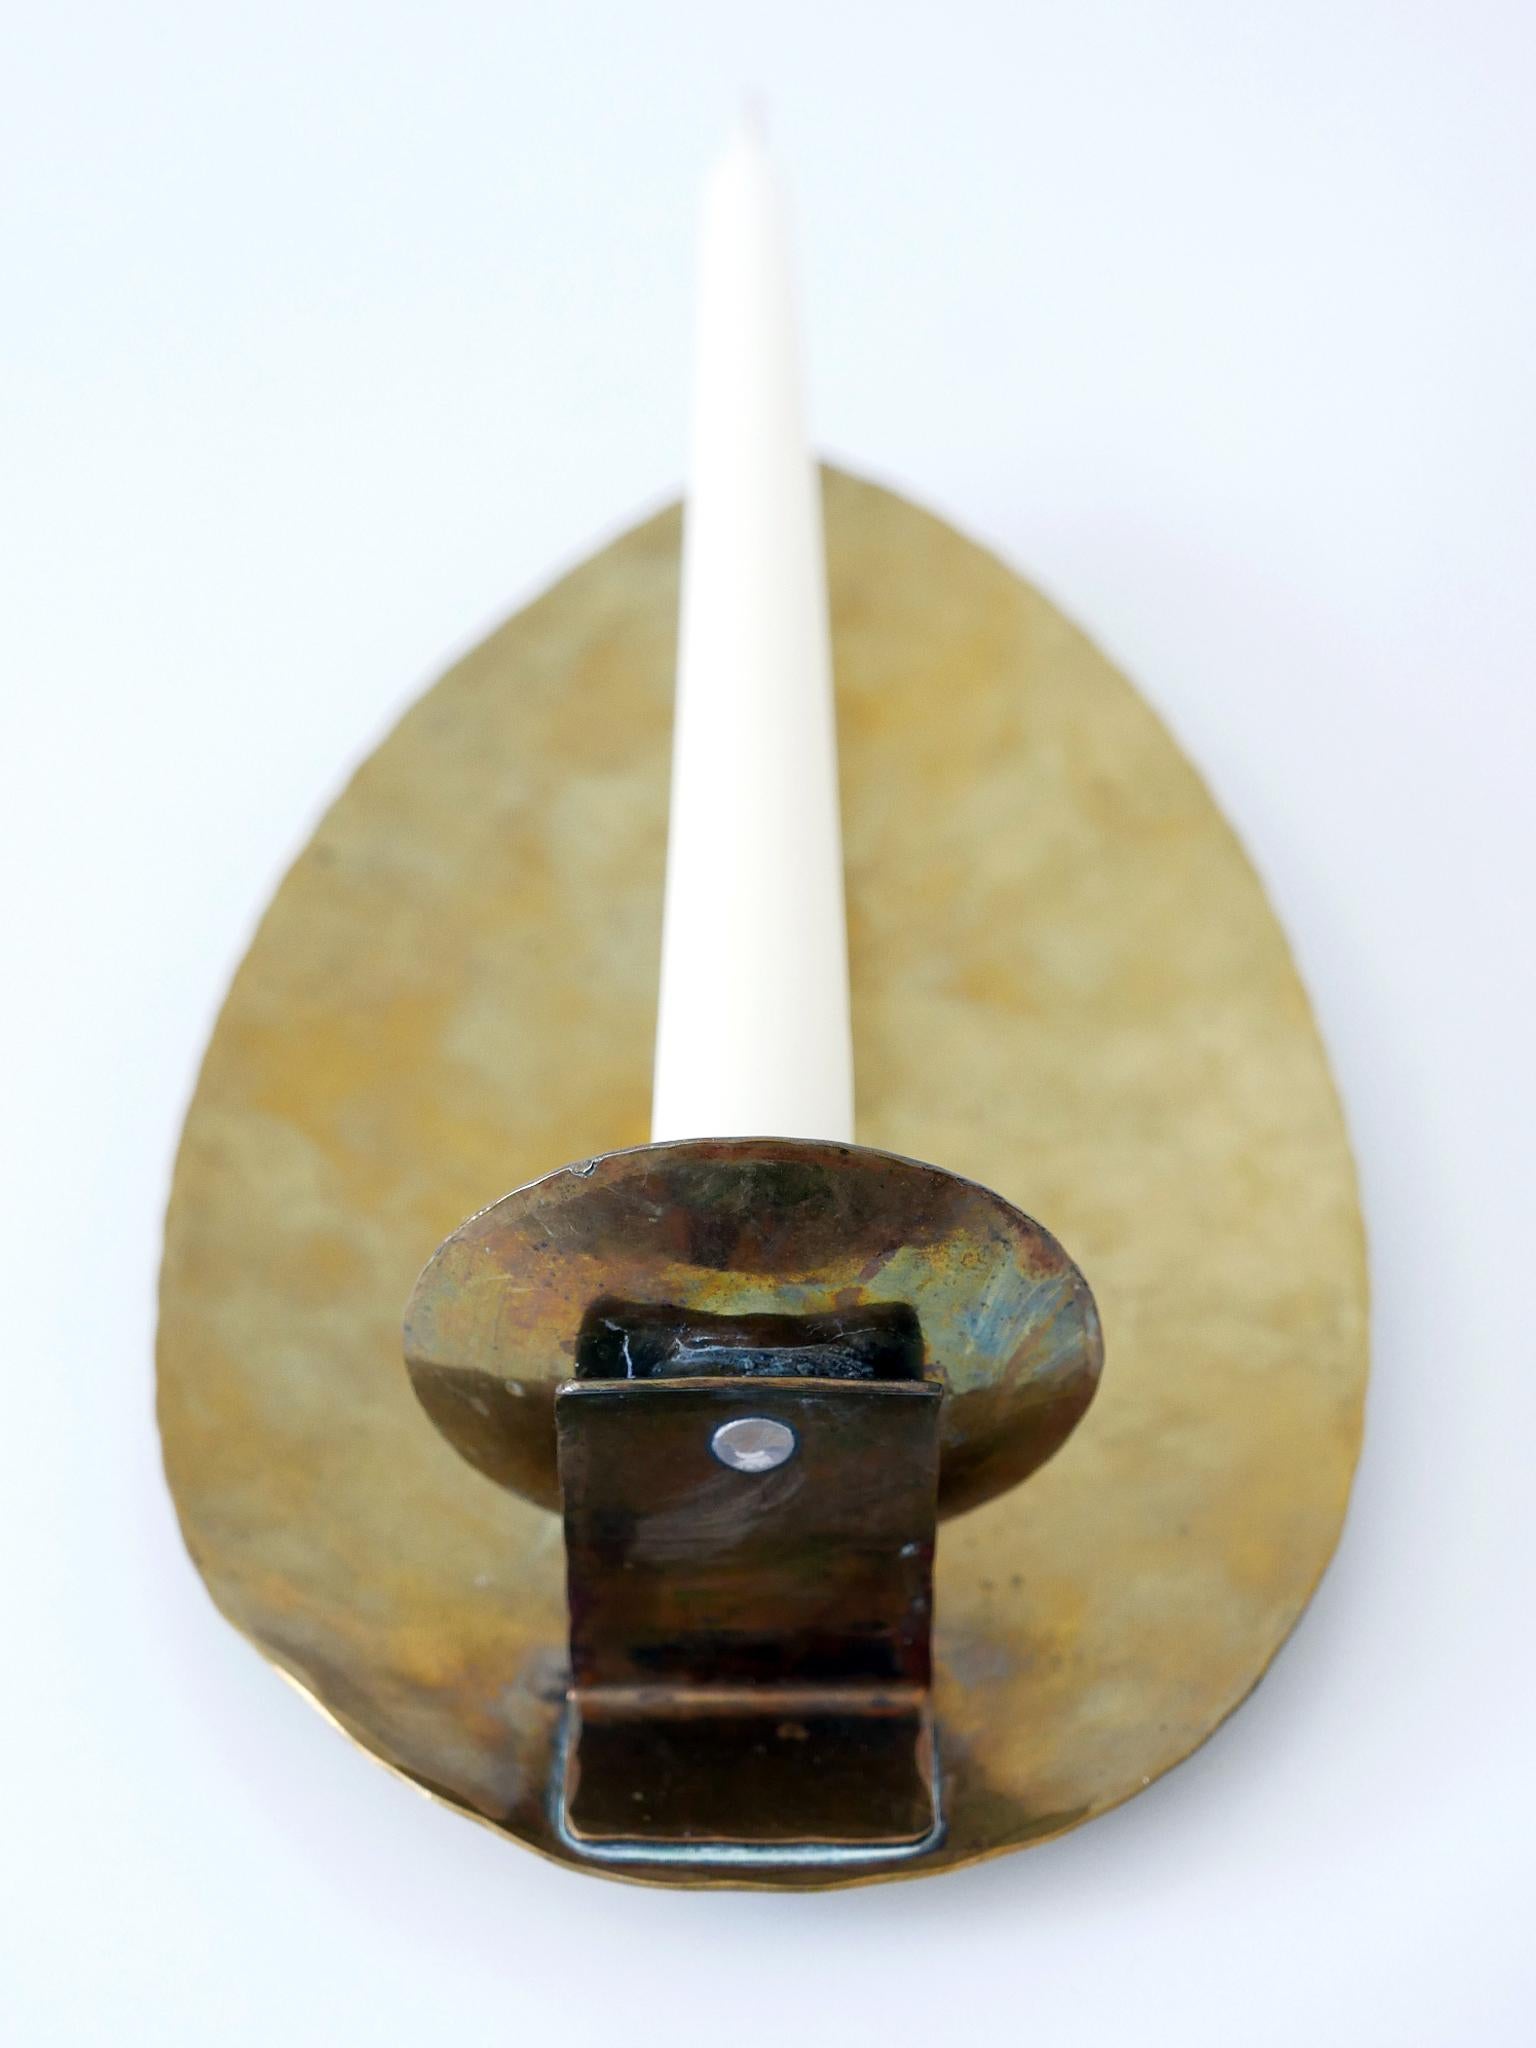 Elegant Hammered Brass Bauhaus Candle Sconce 1930s Germany For Sale 10